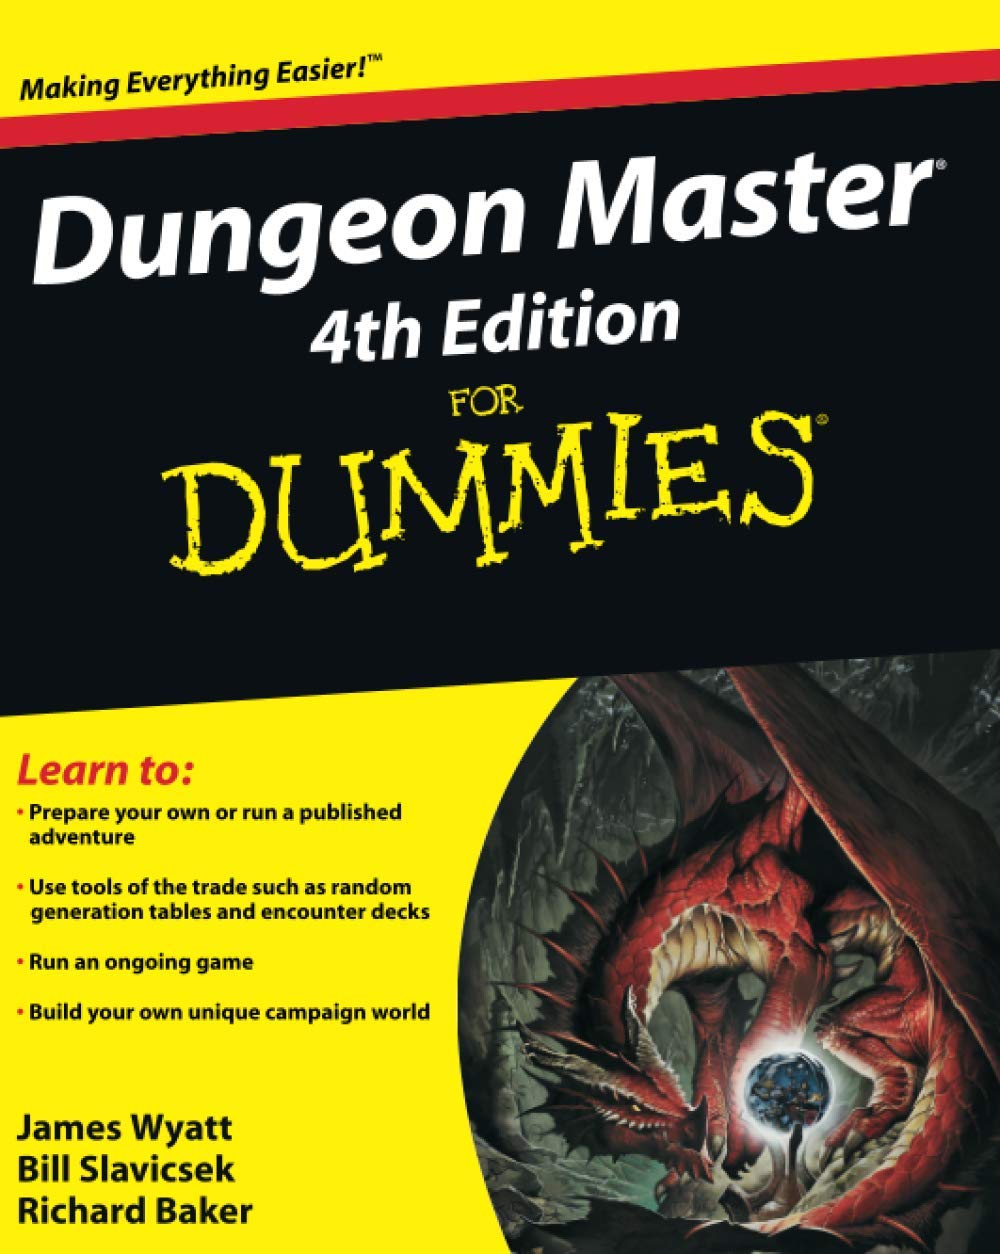 Dungeon Master 4th Edition for Dummies